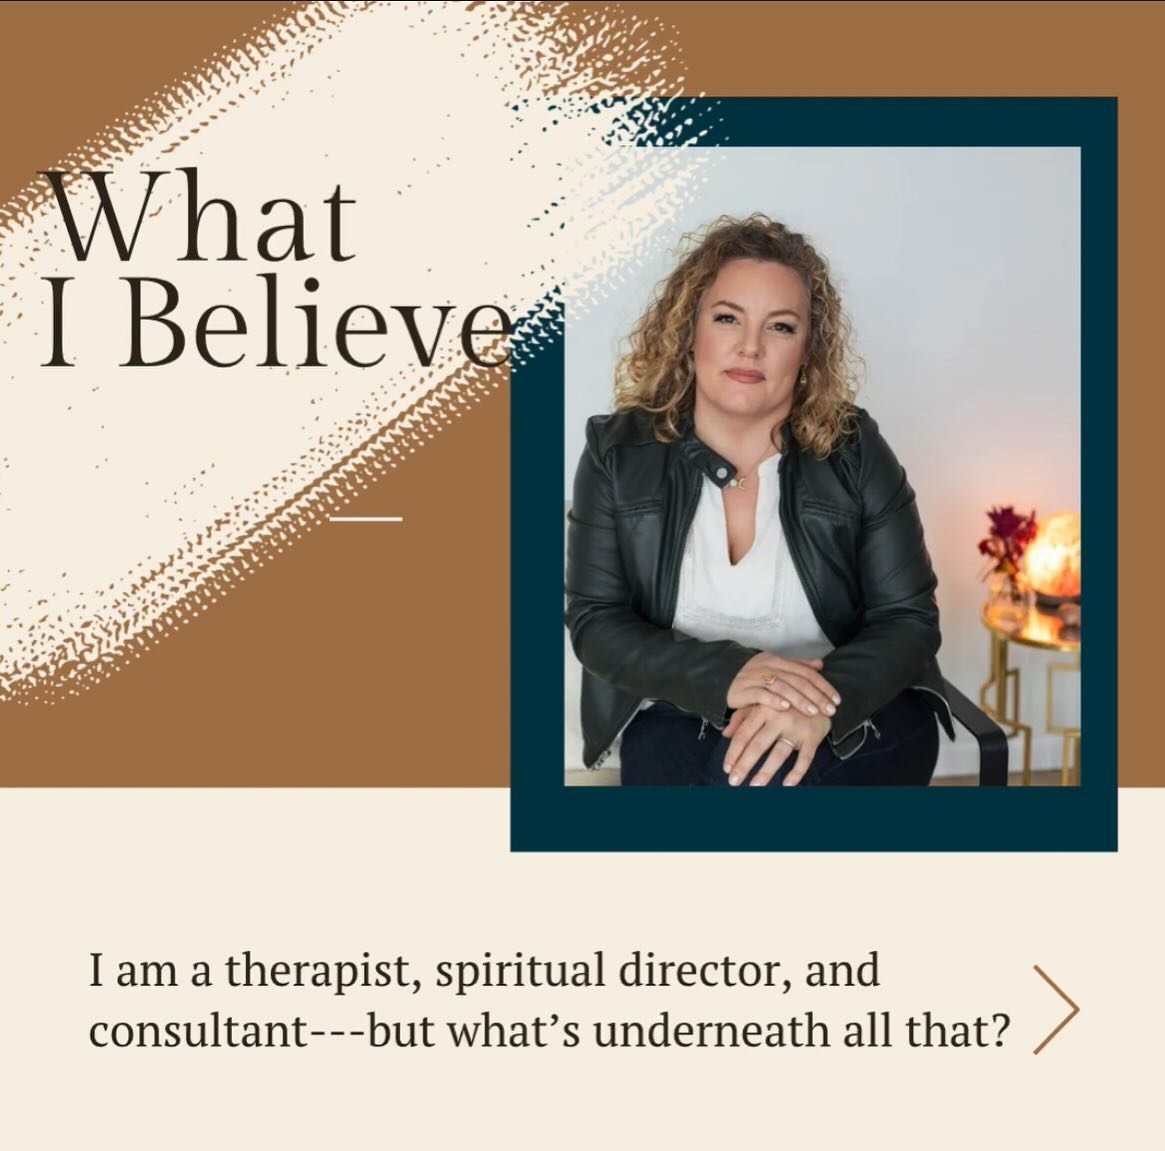 Clients deserve to know how my values inform my work. I am a burnout therapist and work from an anti-oppressive lens, but what does that really look like?

It looks like commitment to learning and continuing education that acknowledges colonized post